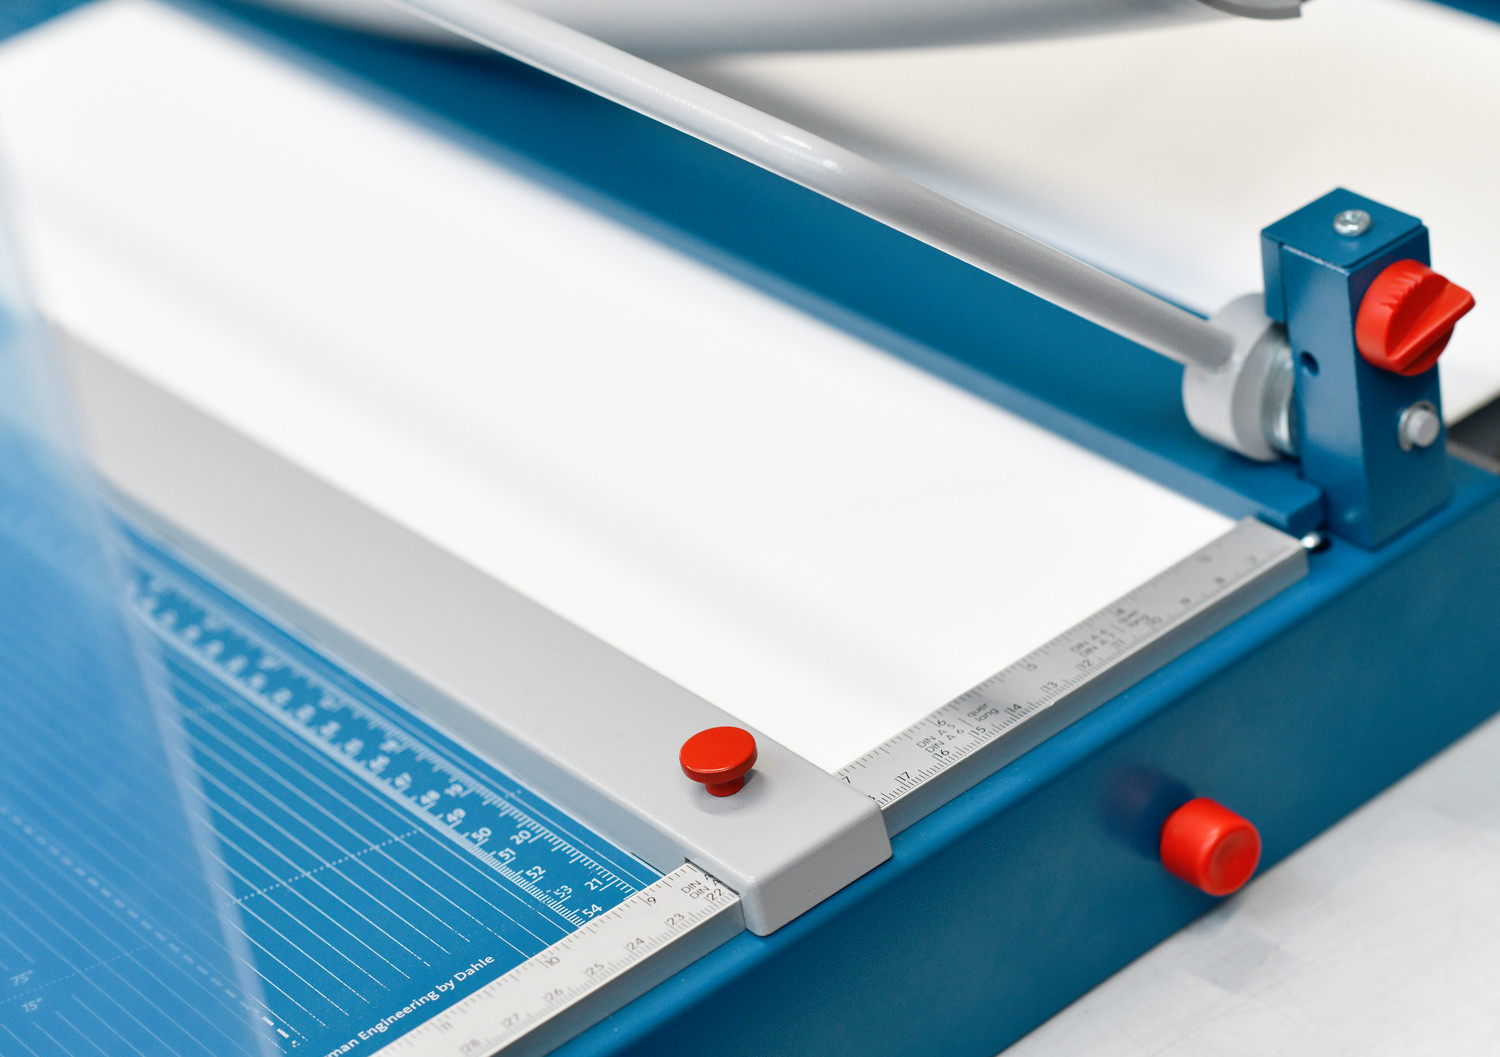 Adjustable metal backstop for fast format finding, can be used on both scale bars. The handy format lines on the cutting table make it easy to trim items to precisely the required format